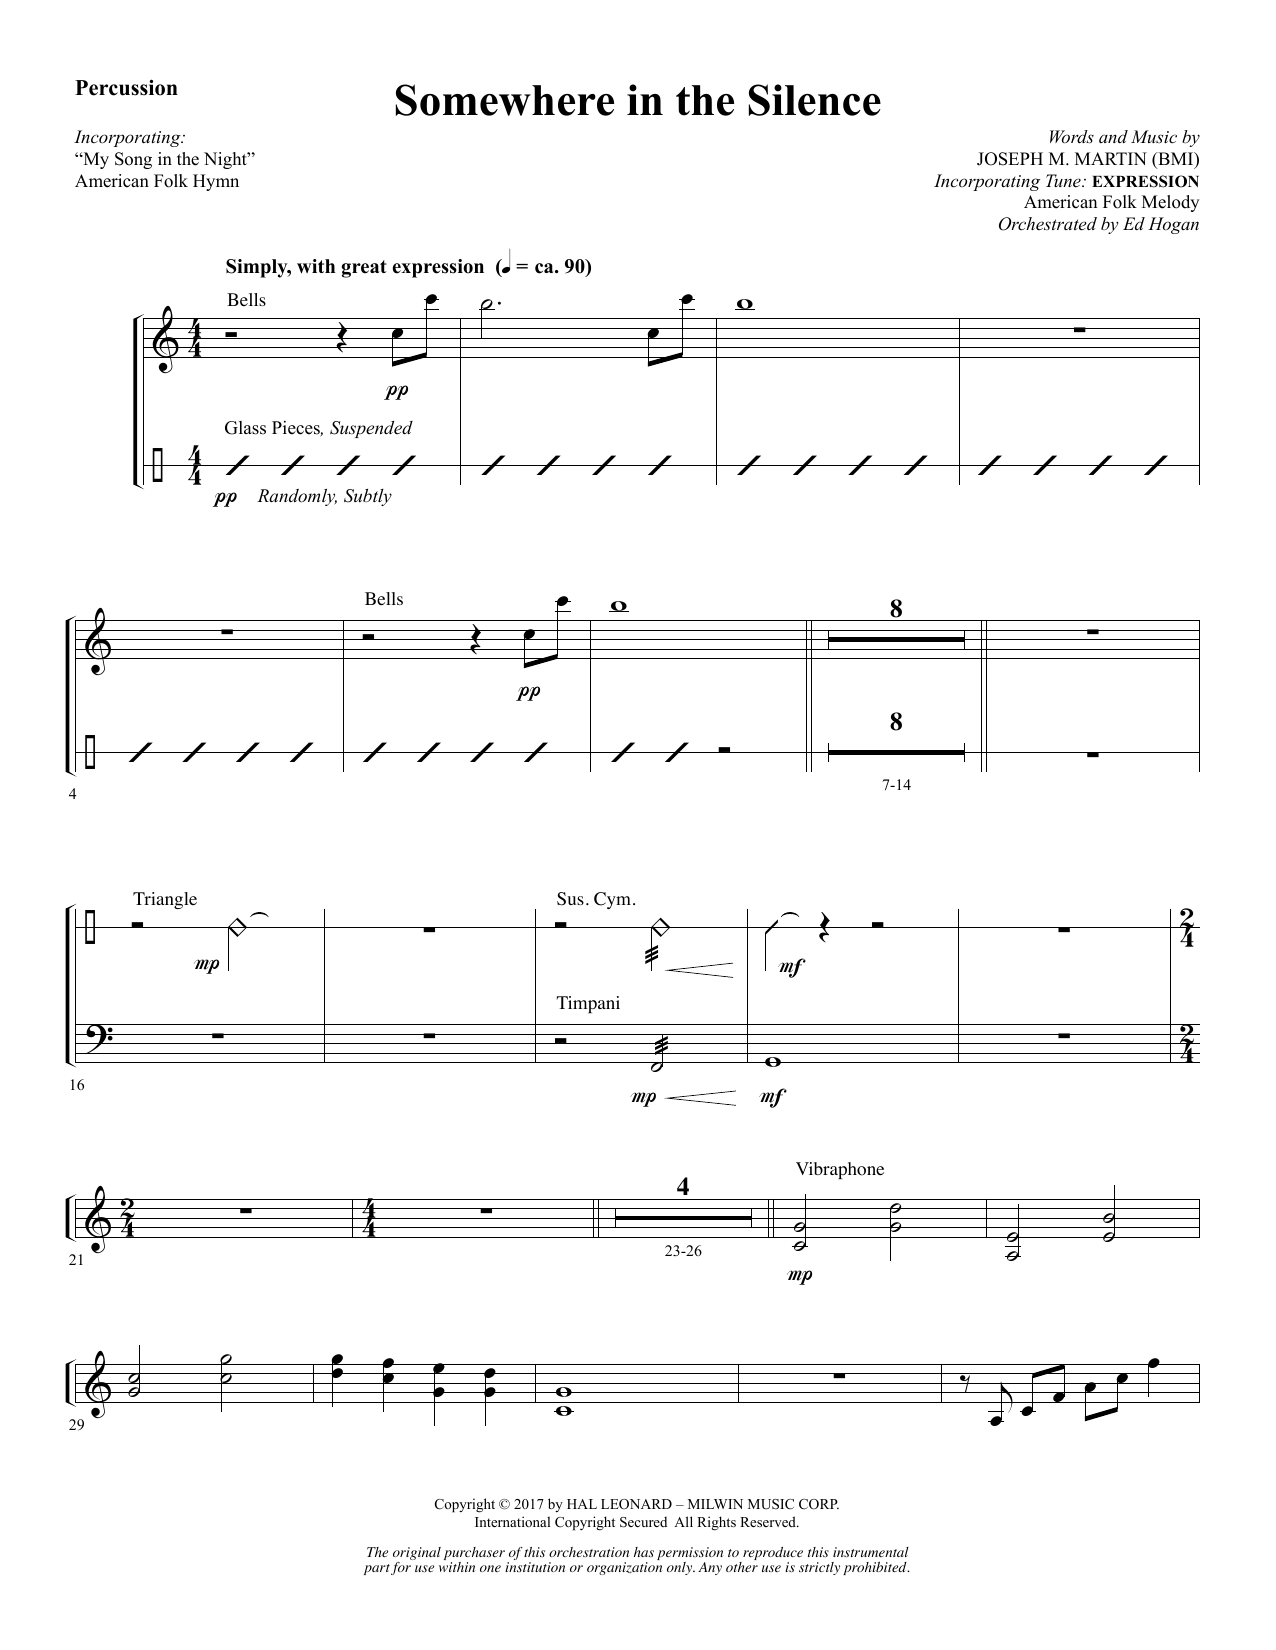 Download Joseph M. Martin Somewhere in the Silence - Percussion Sheet Music